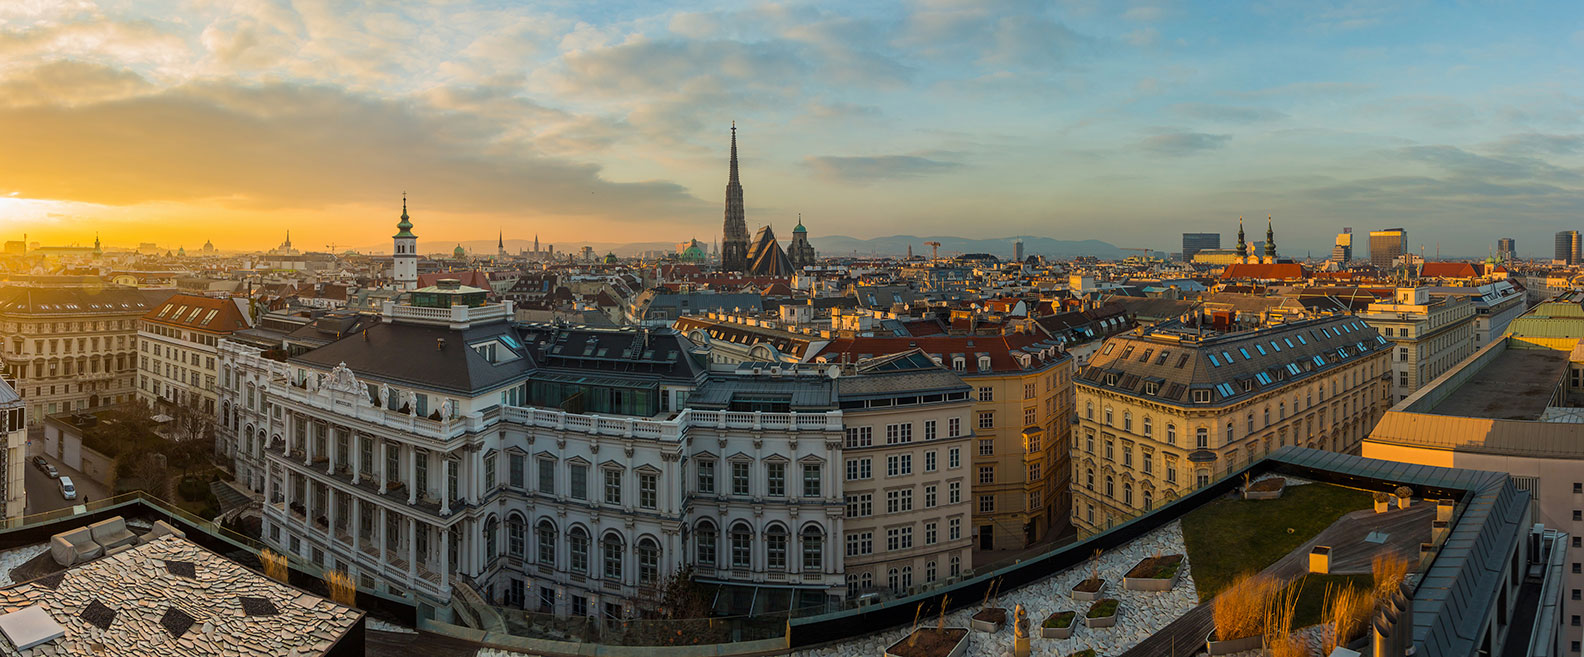 Vienna Waits For You